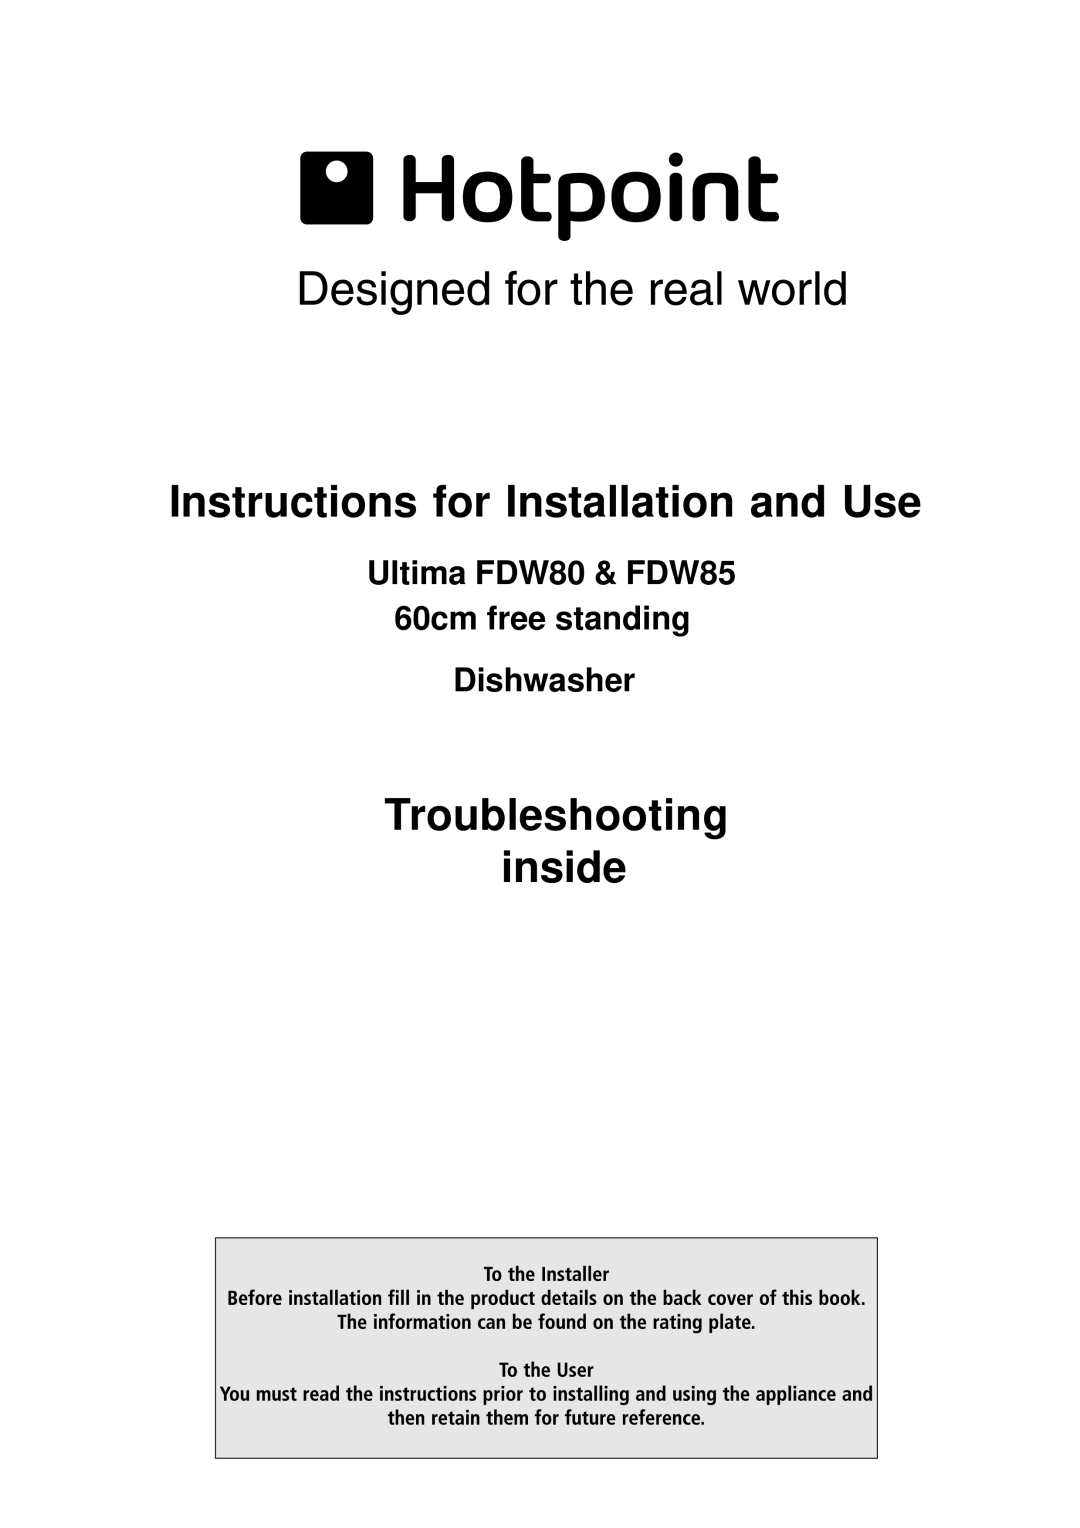 Hotpoint ULTIMA manual Instructions for Installation and Use, Troubleshooting inside 